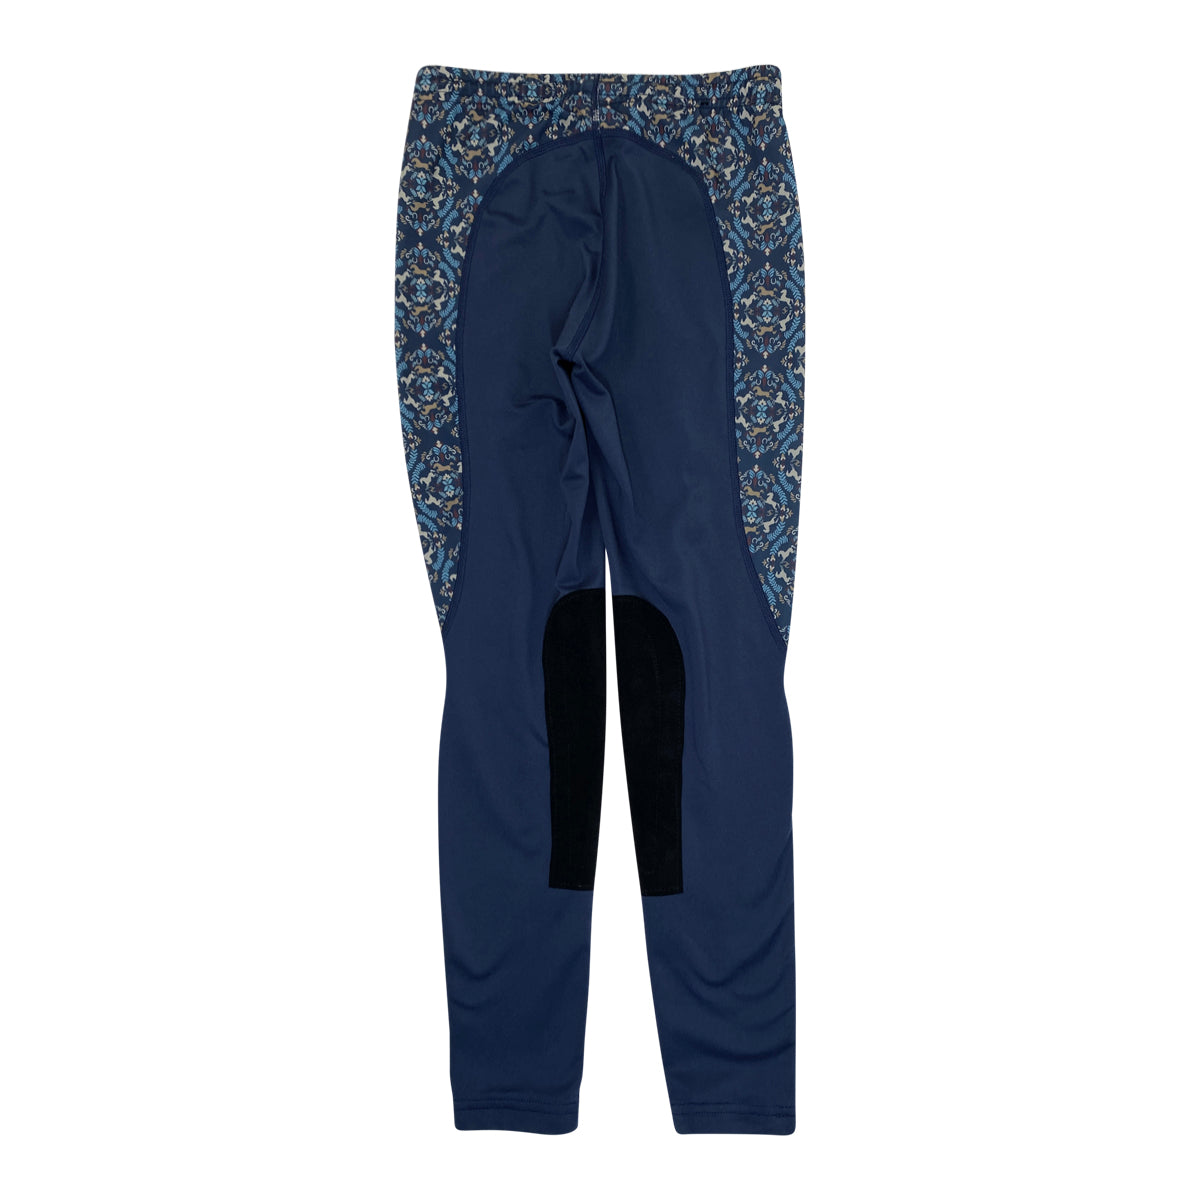 Kerrits Knee Patch Performance Tights in Navy w/Floral Horse Pattern